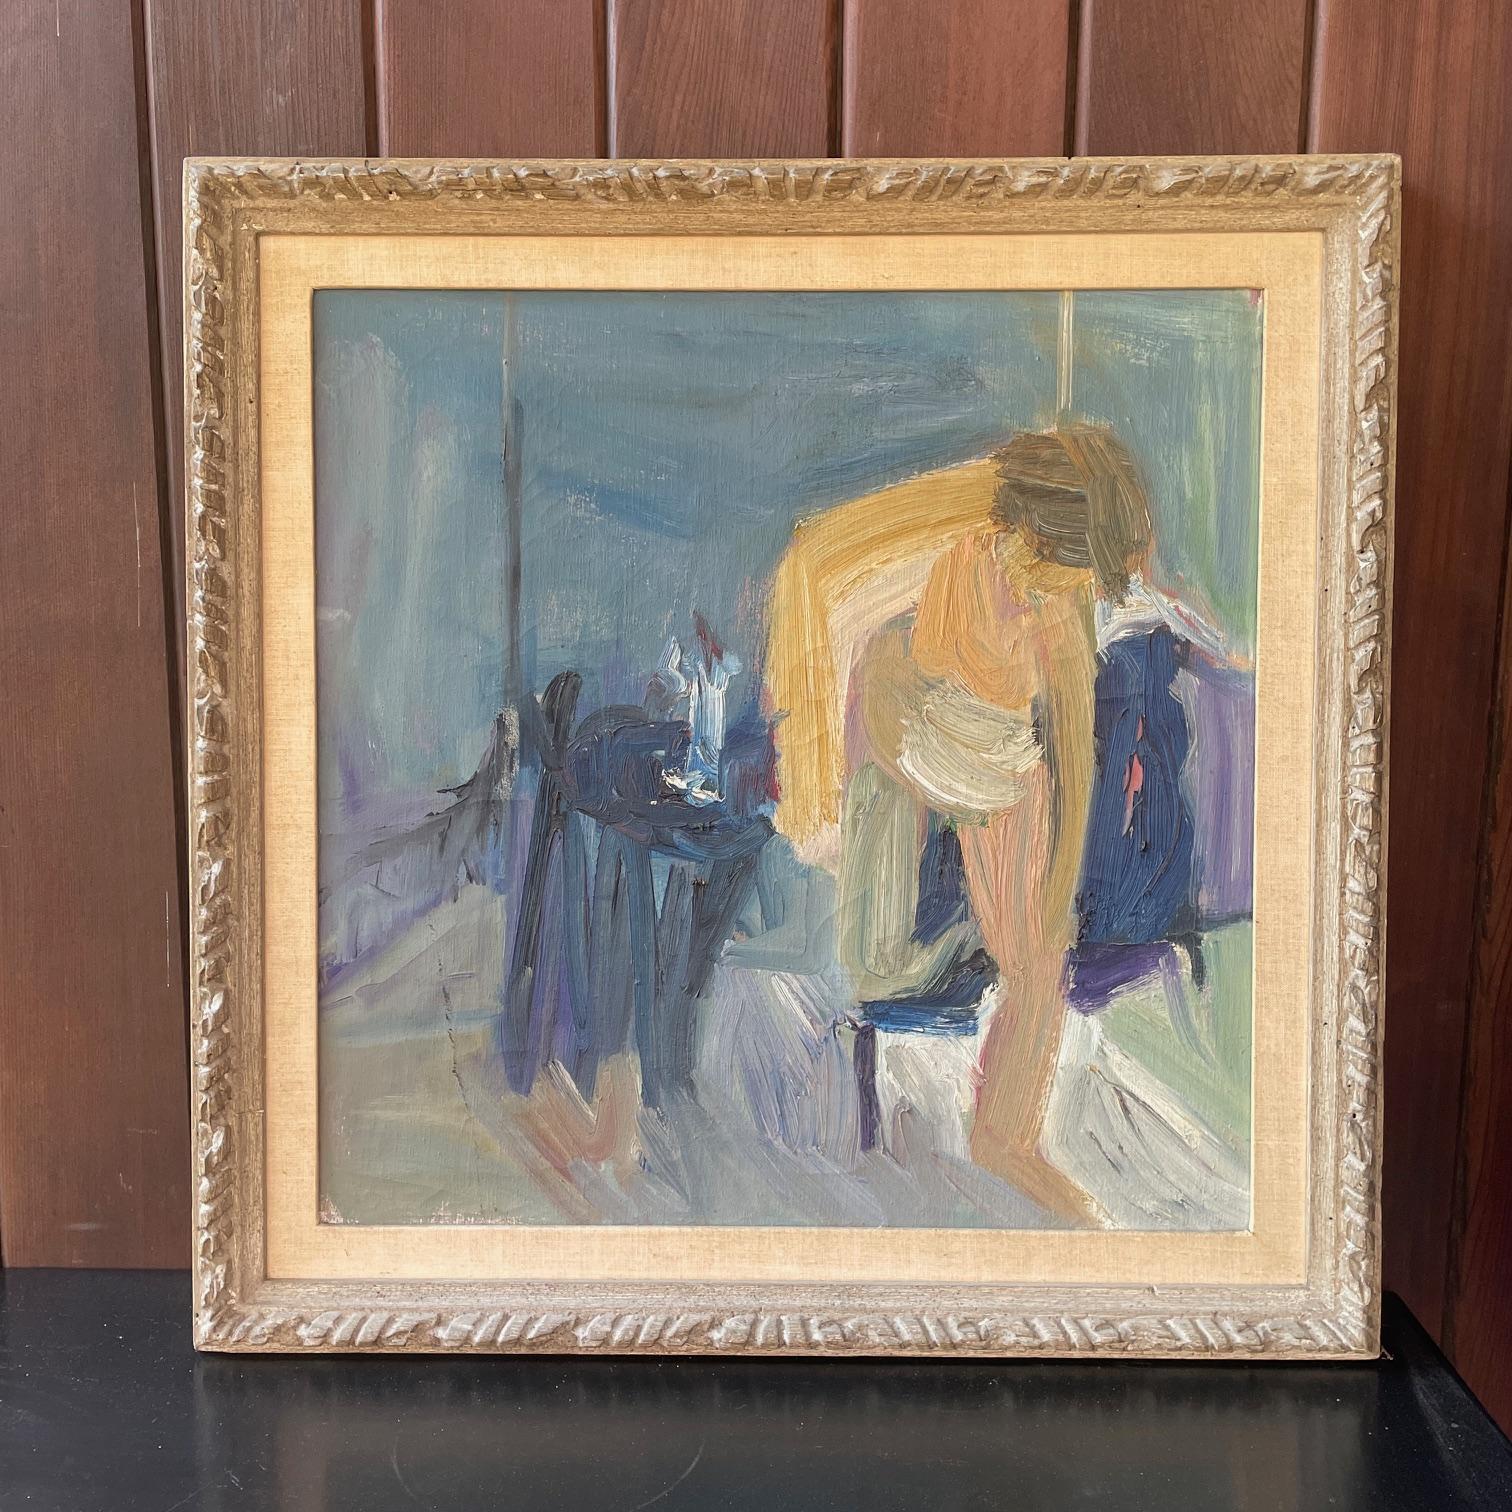 Landgarten, signed on verso.

Estate fresh. Beautiful calming painting.  Unrestored, and in Fair/Poor vintage condition, no rips, no holes, but a dark scuff streak on left side, and some textural cracking underneath top layer of paint, and some top